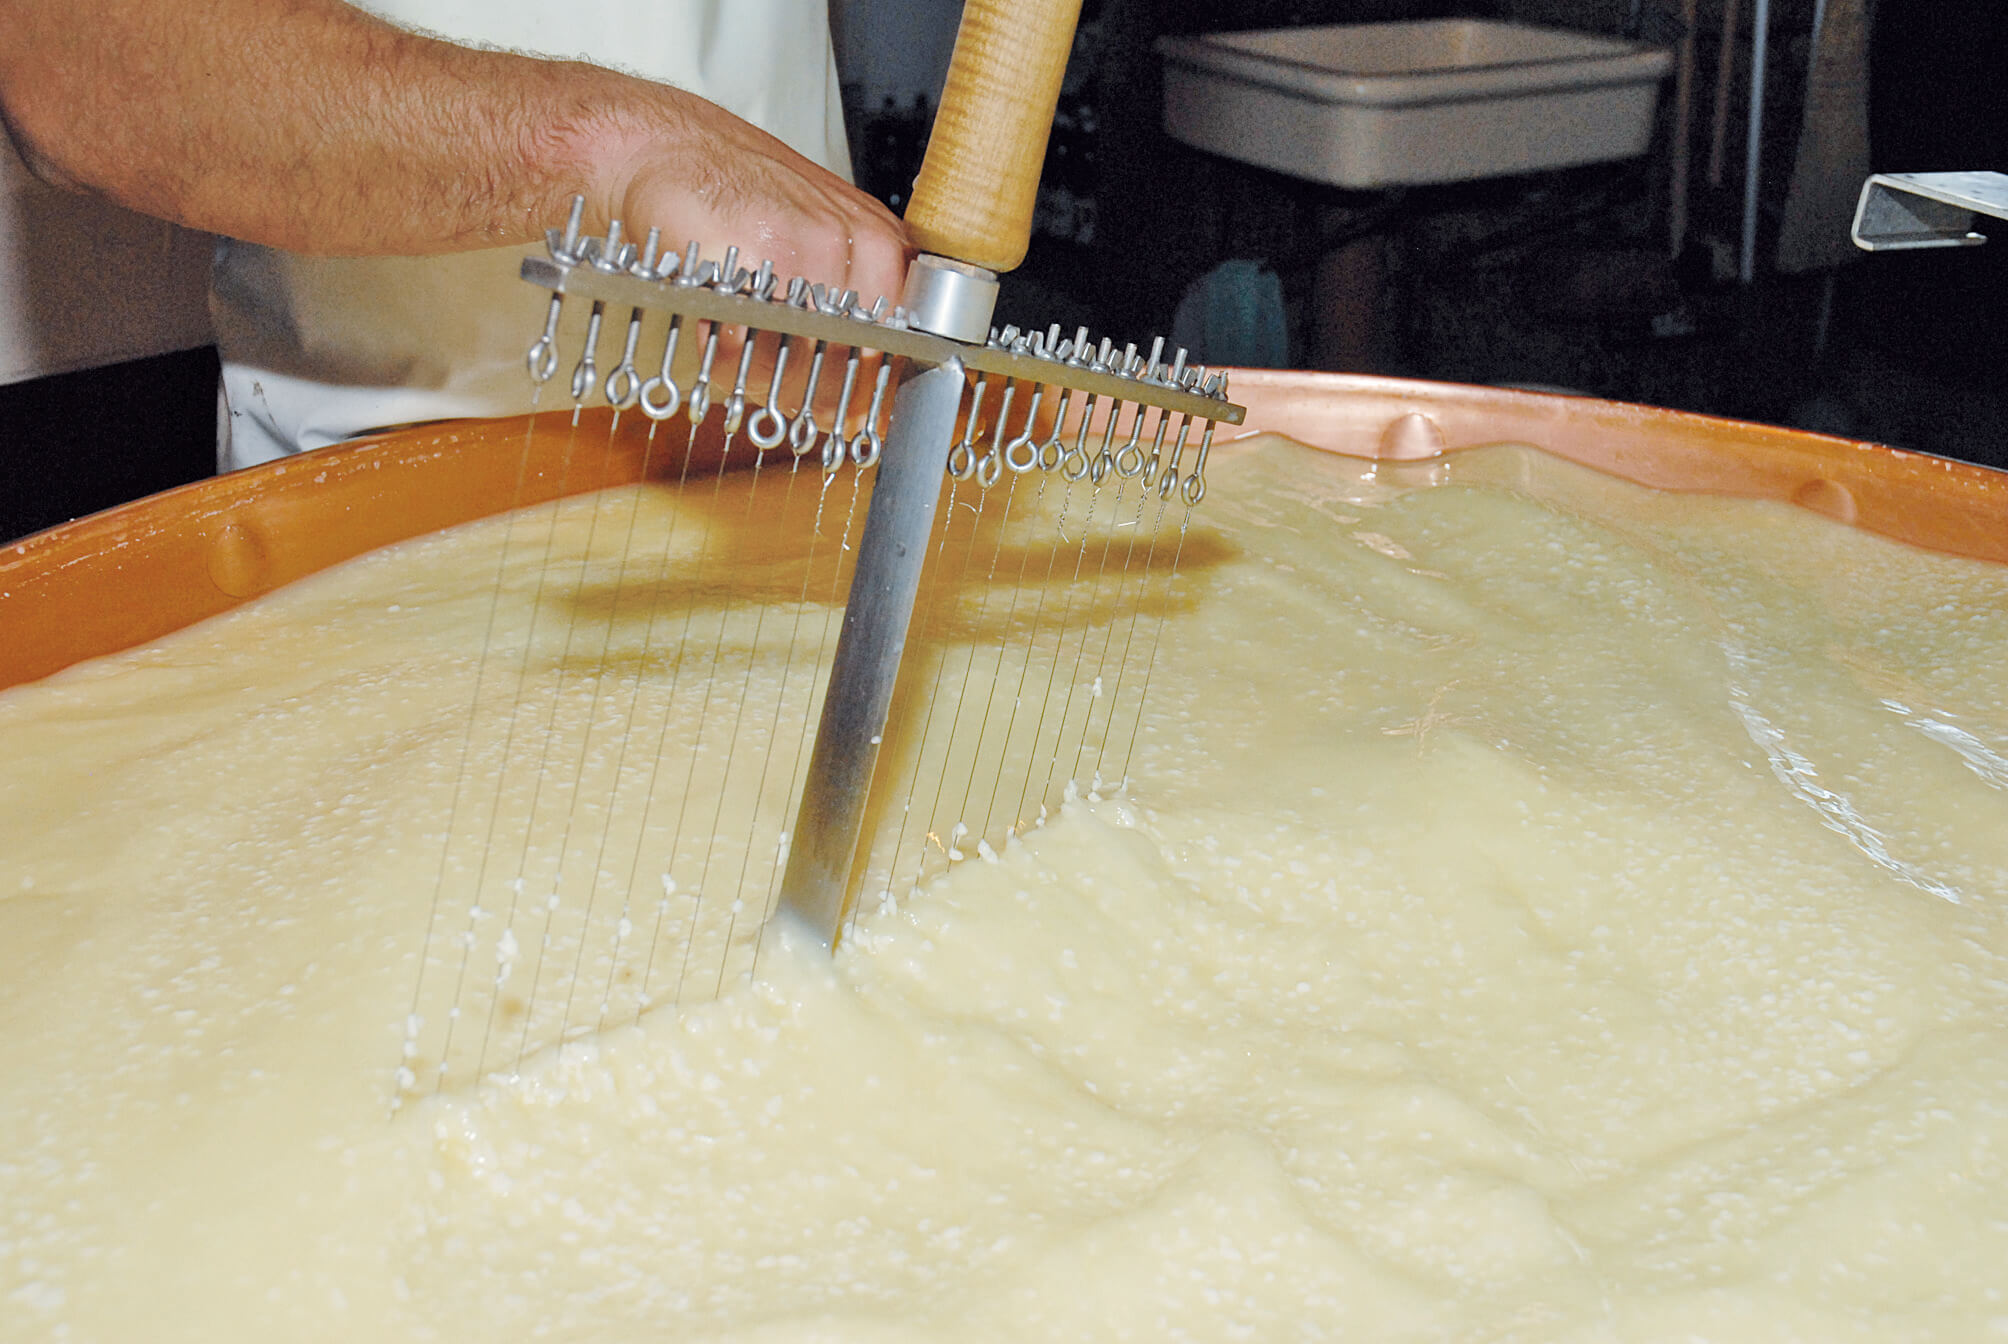 The cheesemaker cuts the curd with the harp